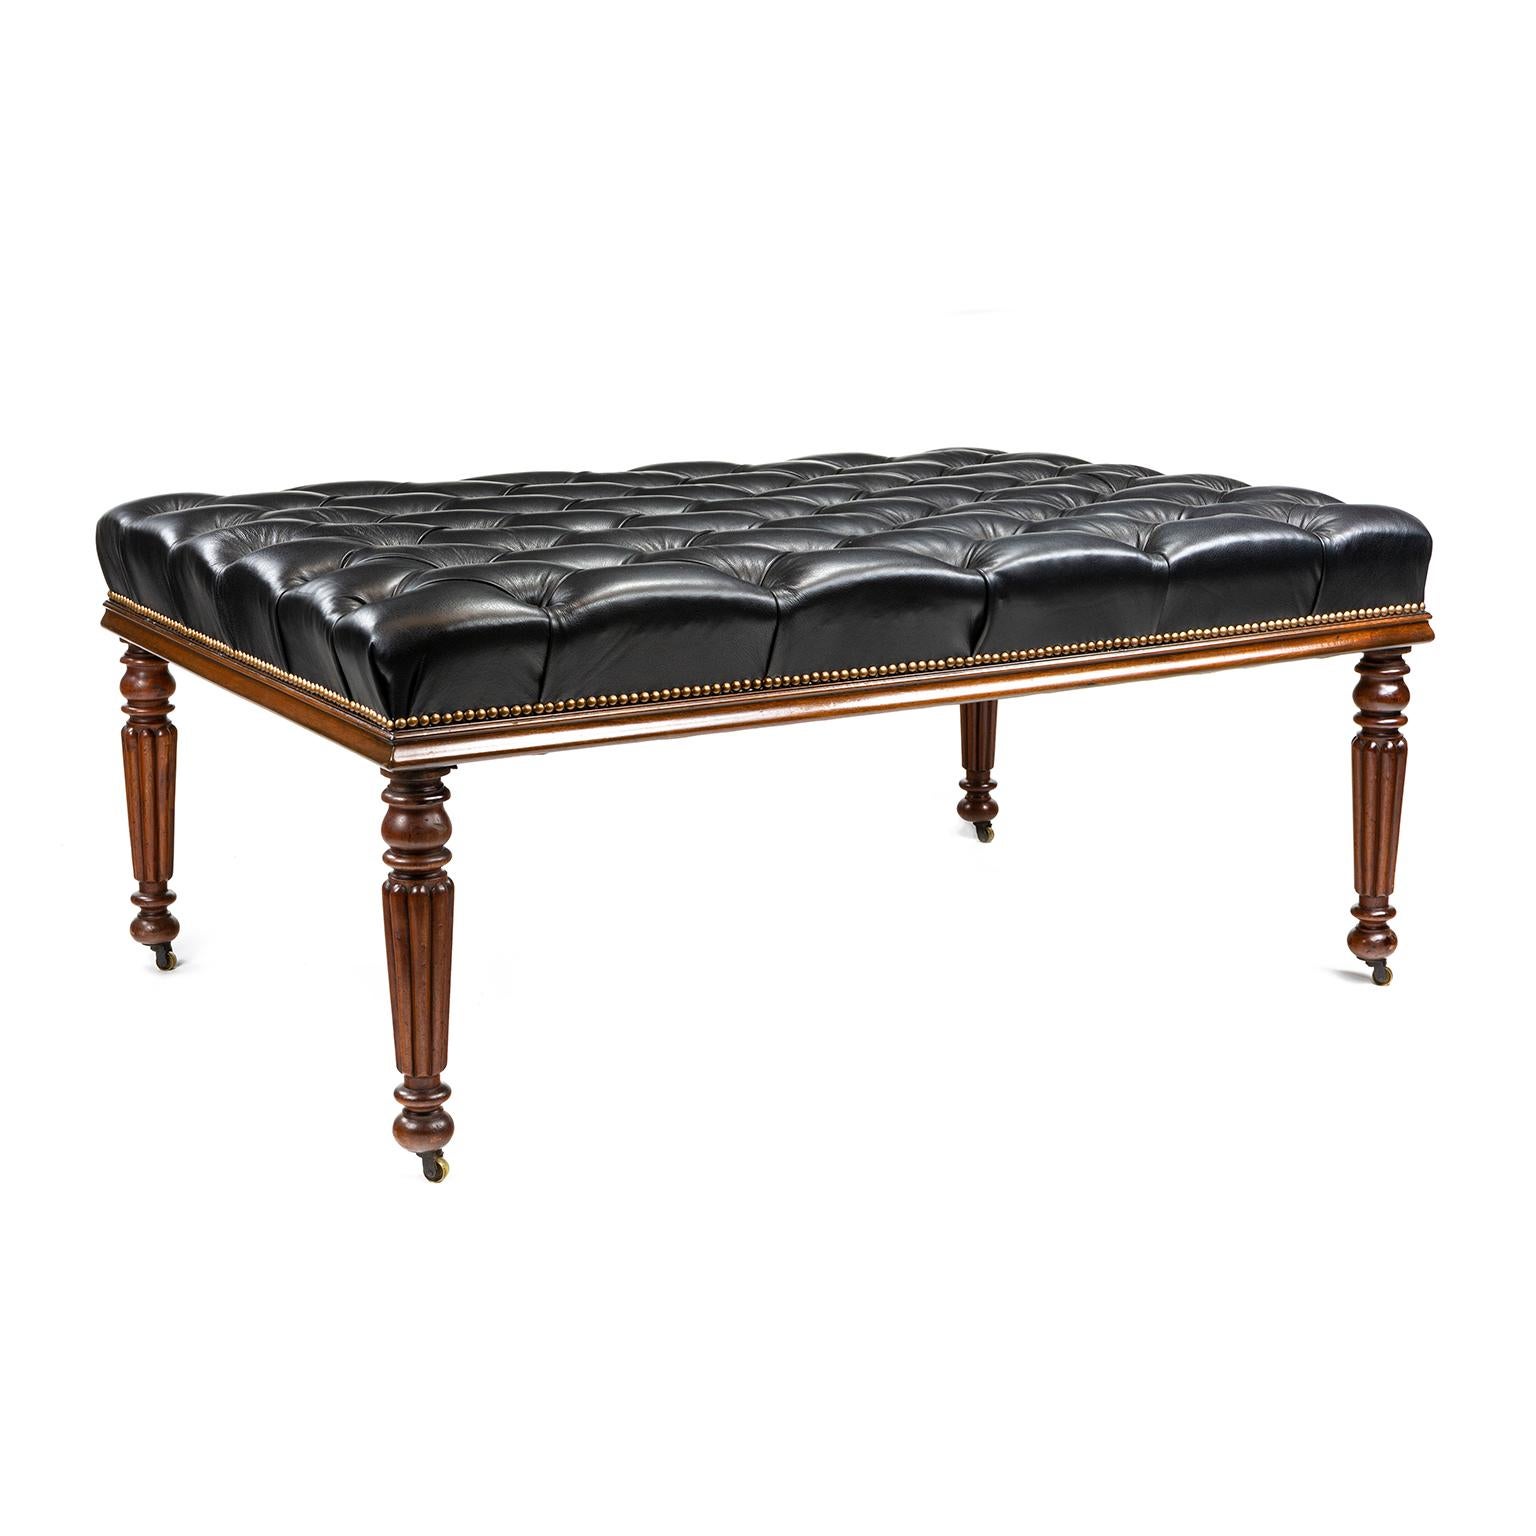 Large Gillows style foot rest or otterman, 20th C, the legs are original Gillows patern, covered in deep buttoned black leather on a mahogany frame.

Gillows of Lancaster and London, also known as Gillow & Co., was an English furniture making firm